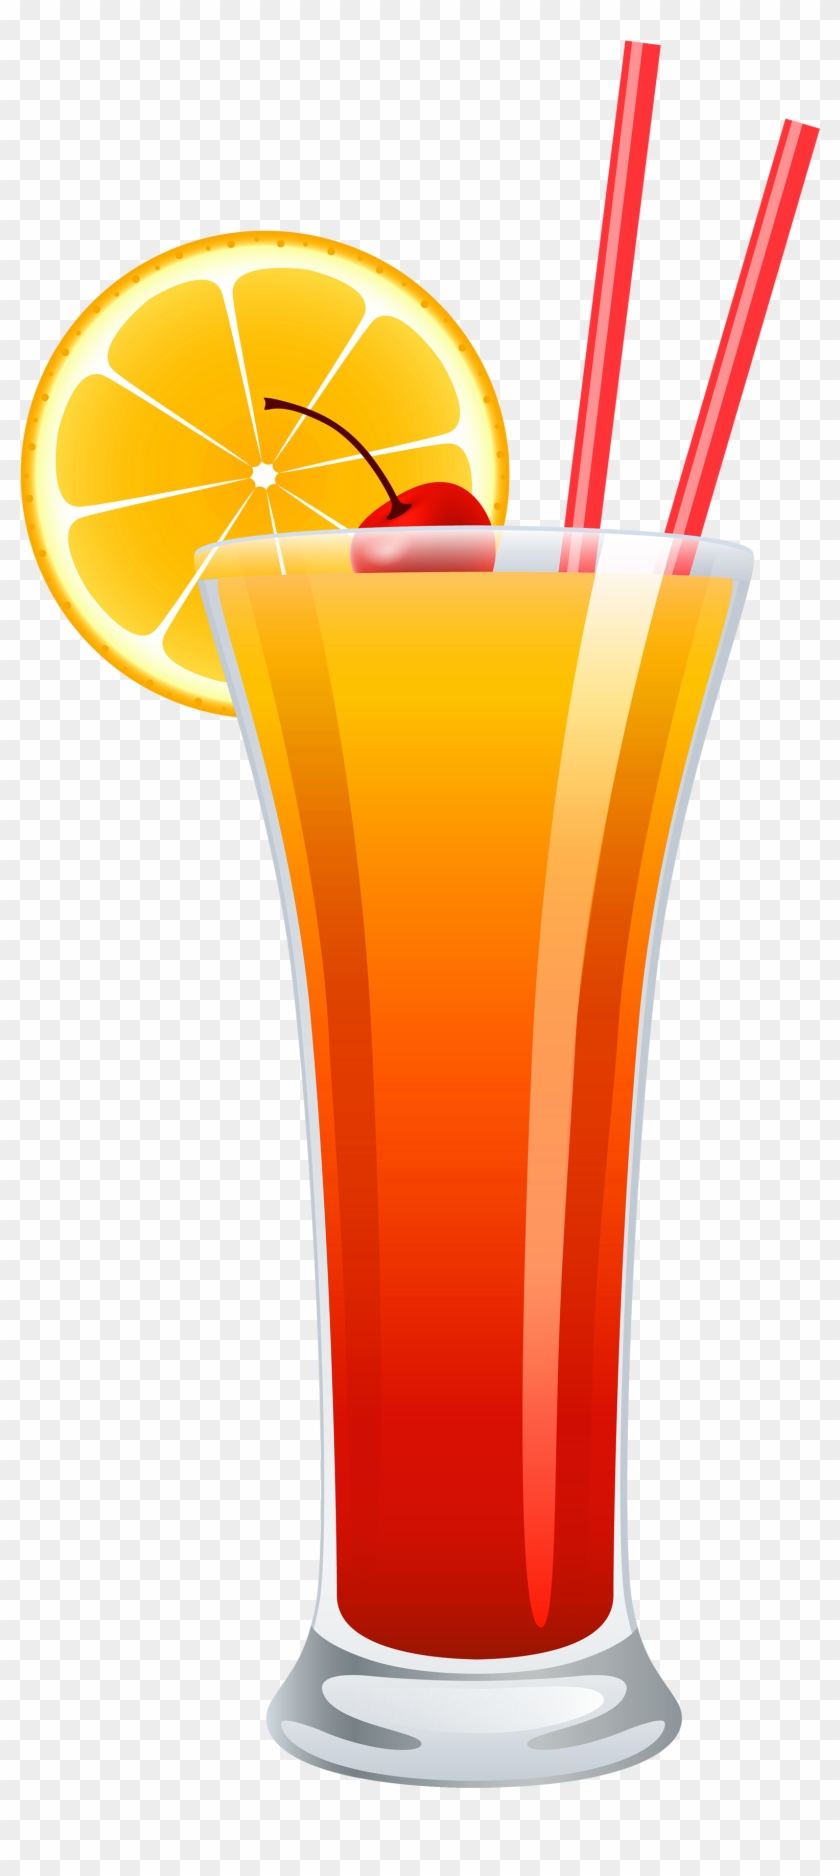 Alcohol Drink Png For Free Download - Tequila Sunrise Cocktail Png Clipart #72080